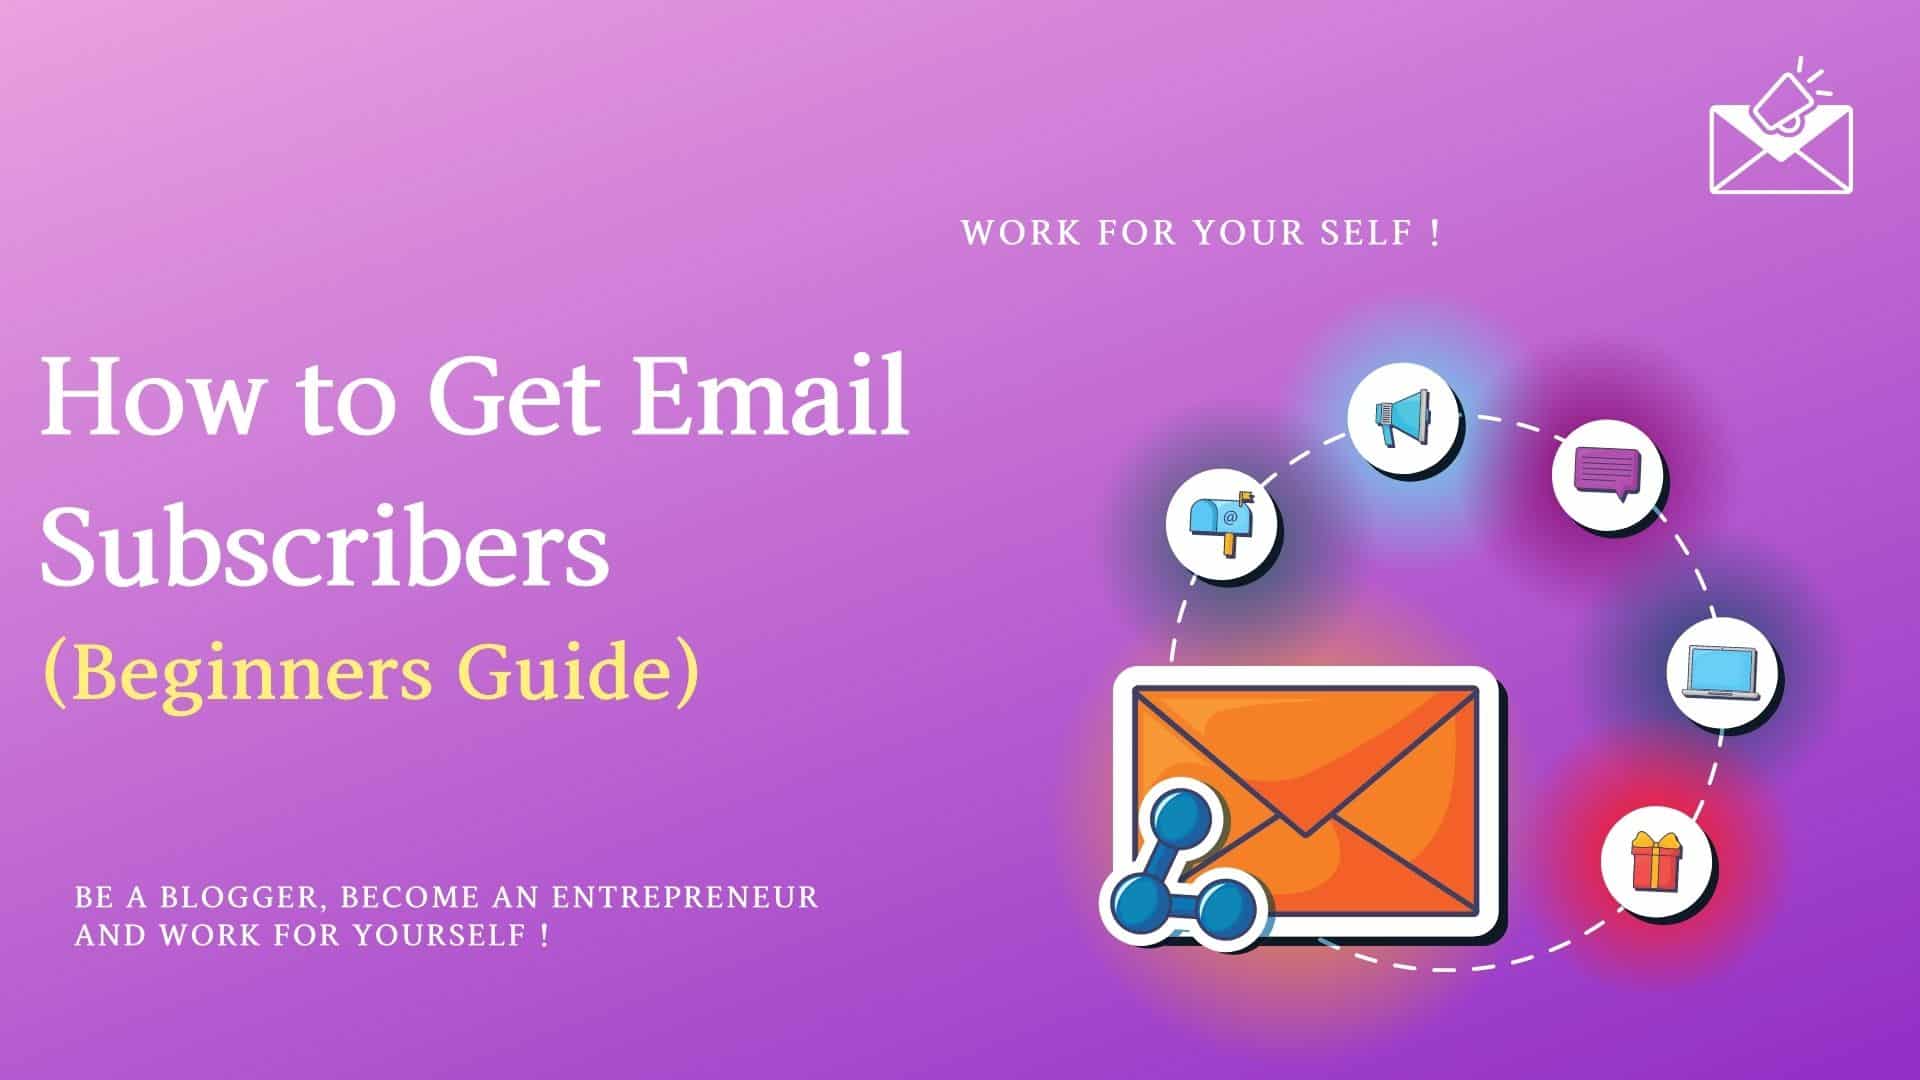 how-to-get-email-subscribers-beginners-guide-mssaro